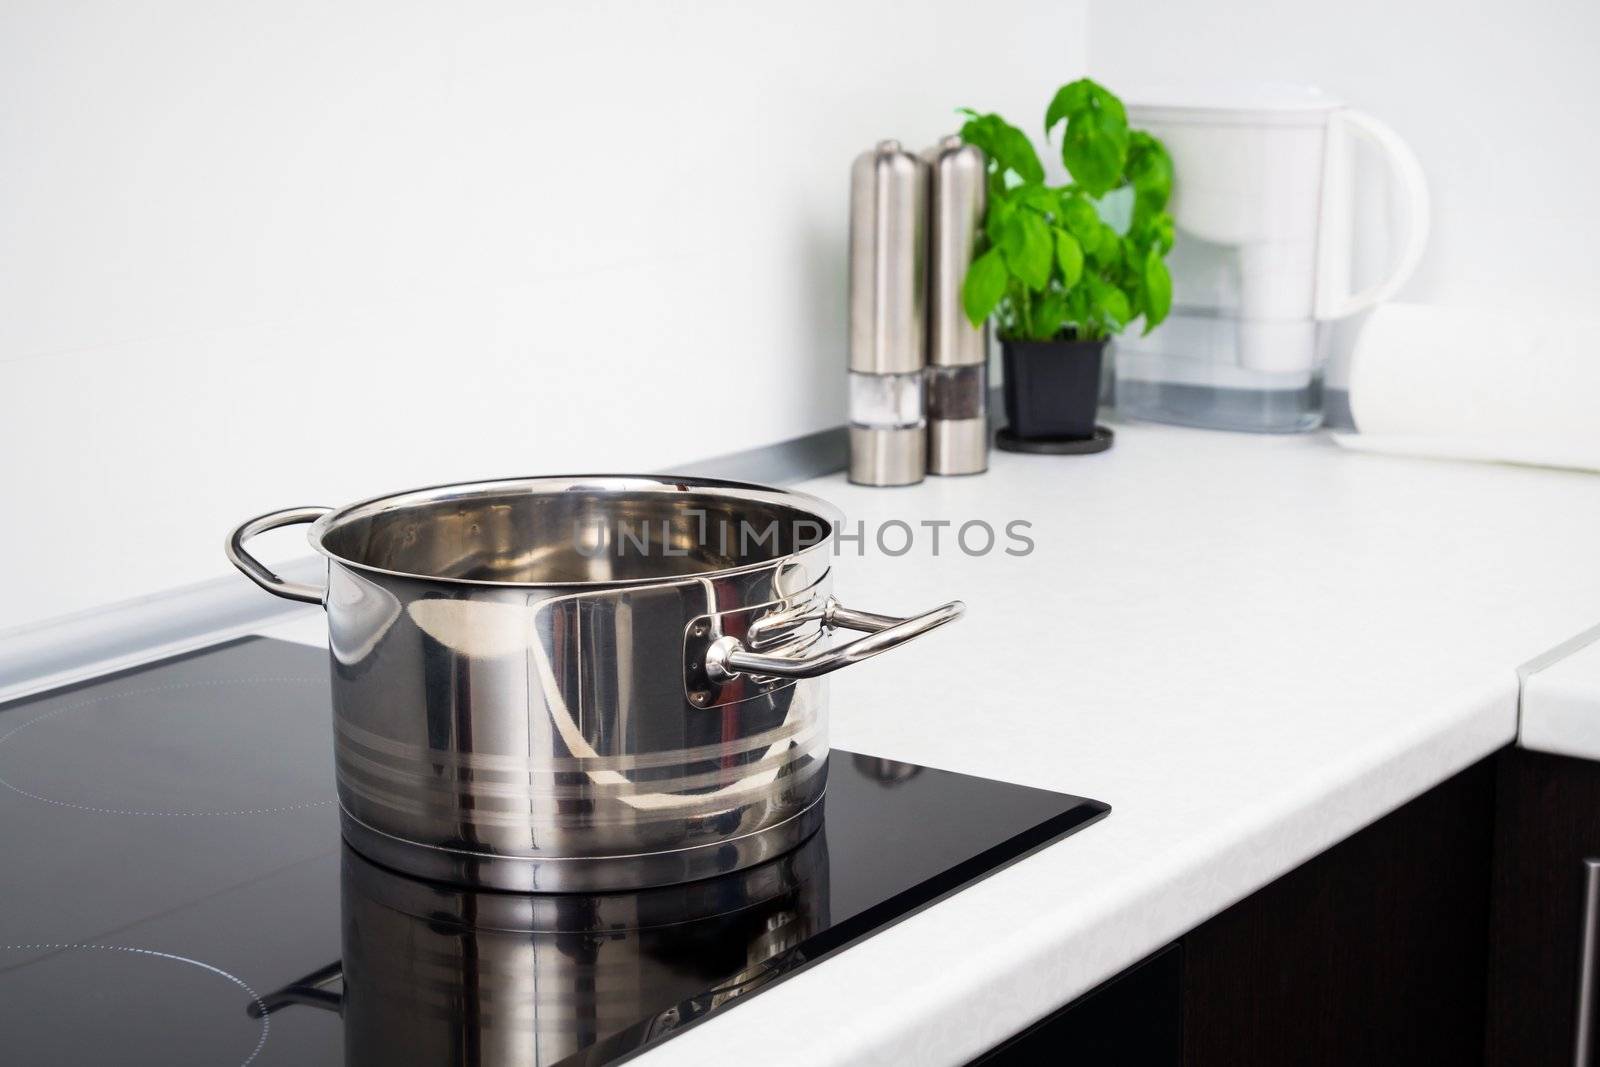 Pot in modern kitchen with induction stove by simpson33